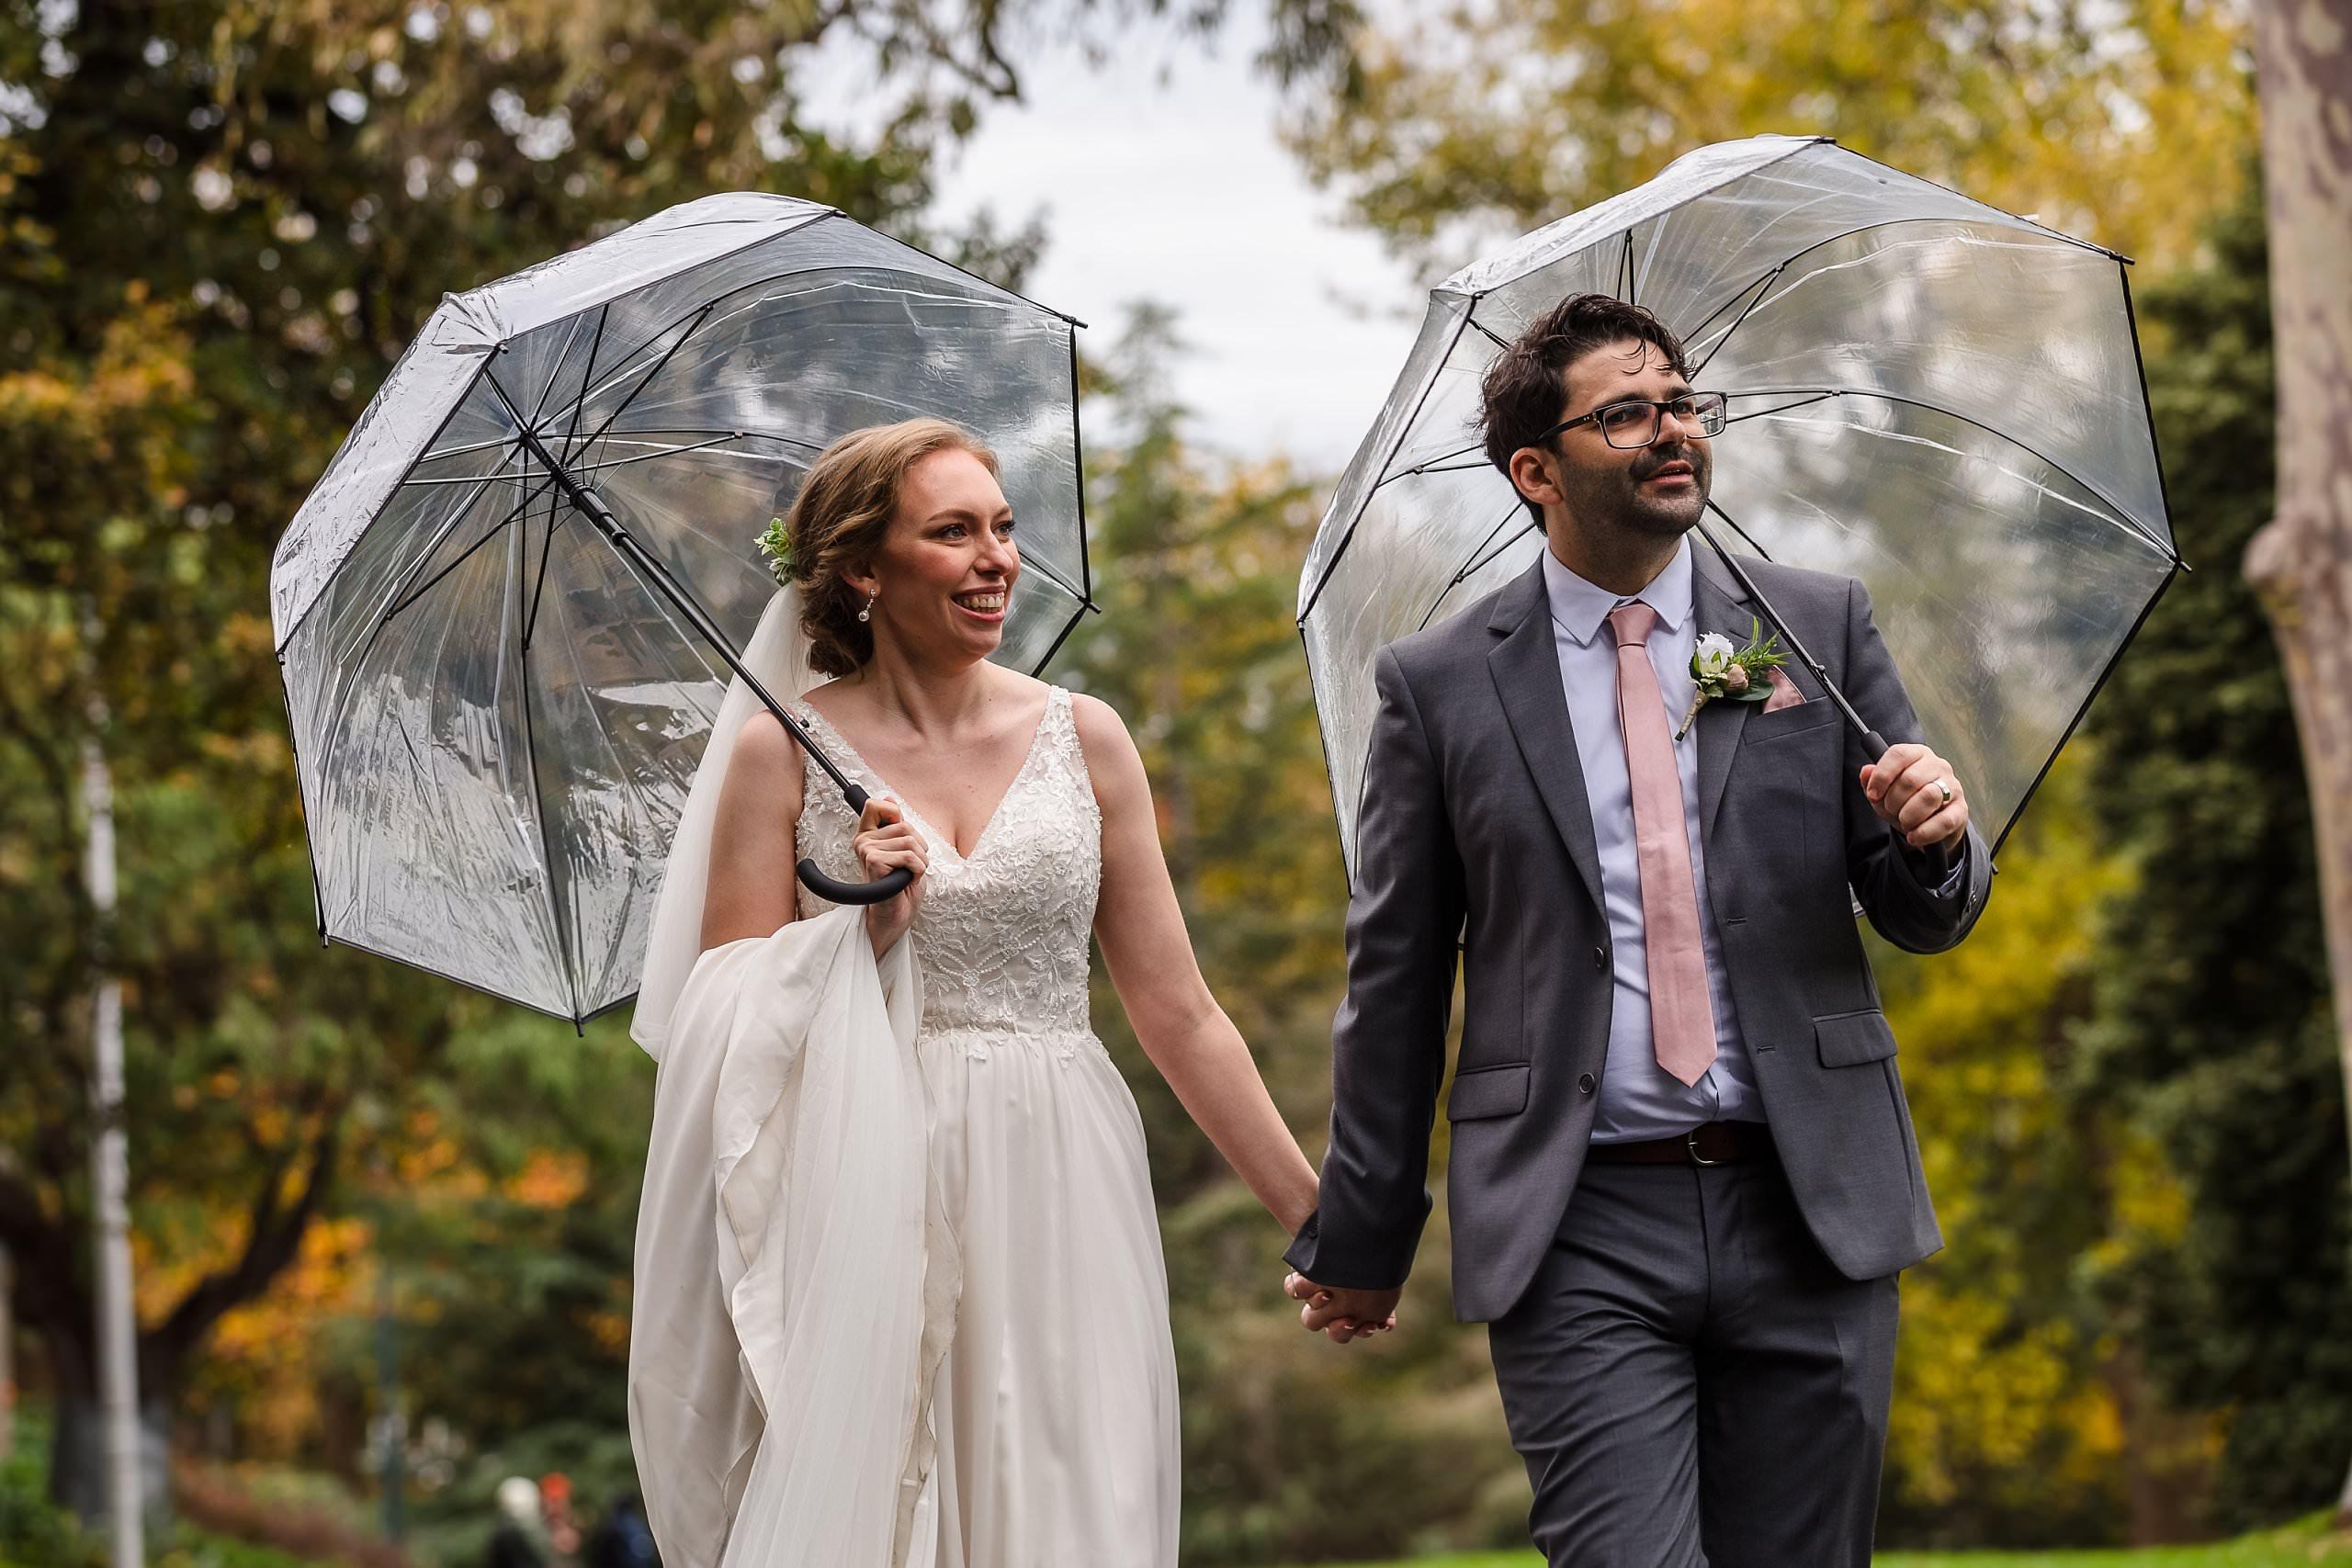 bride and groom walking and holding umbrellas